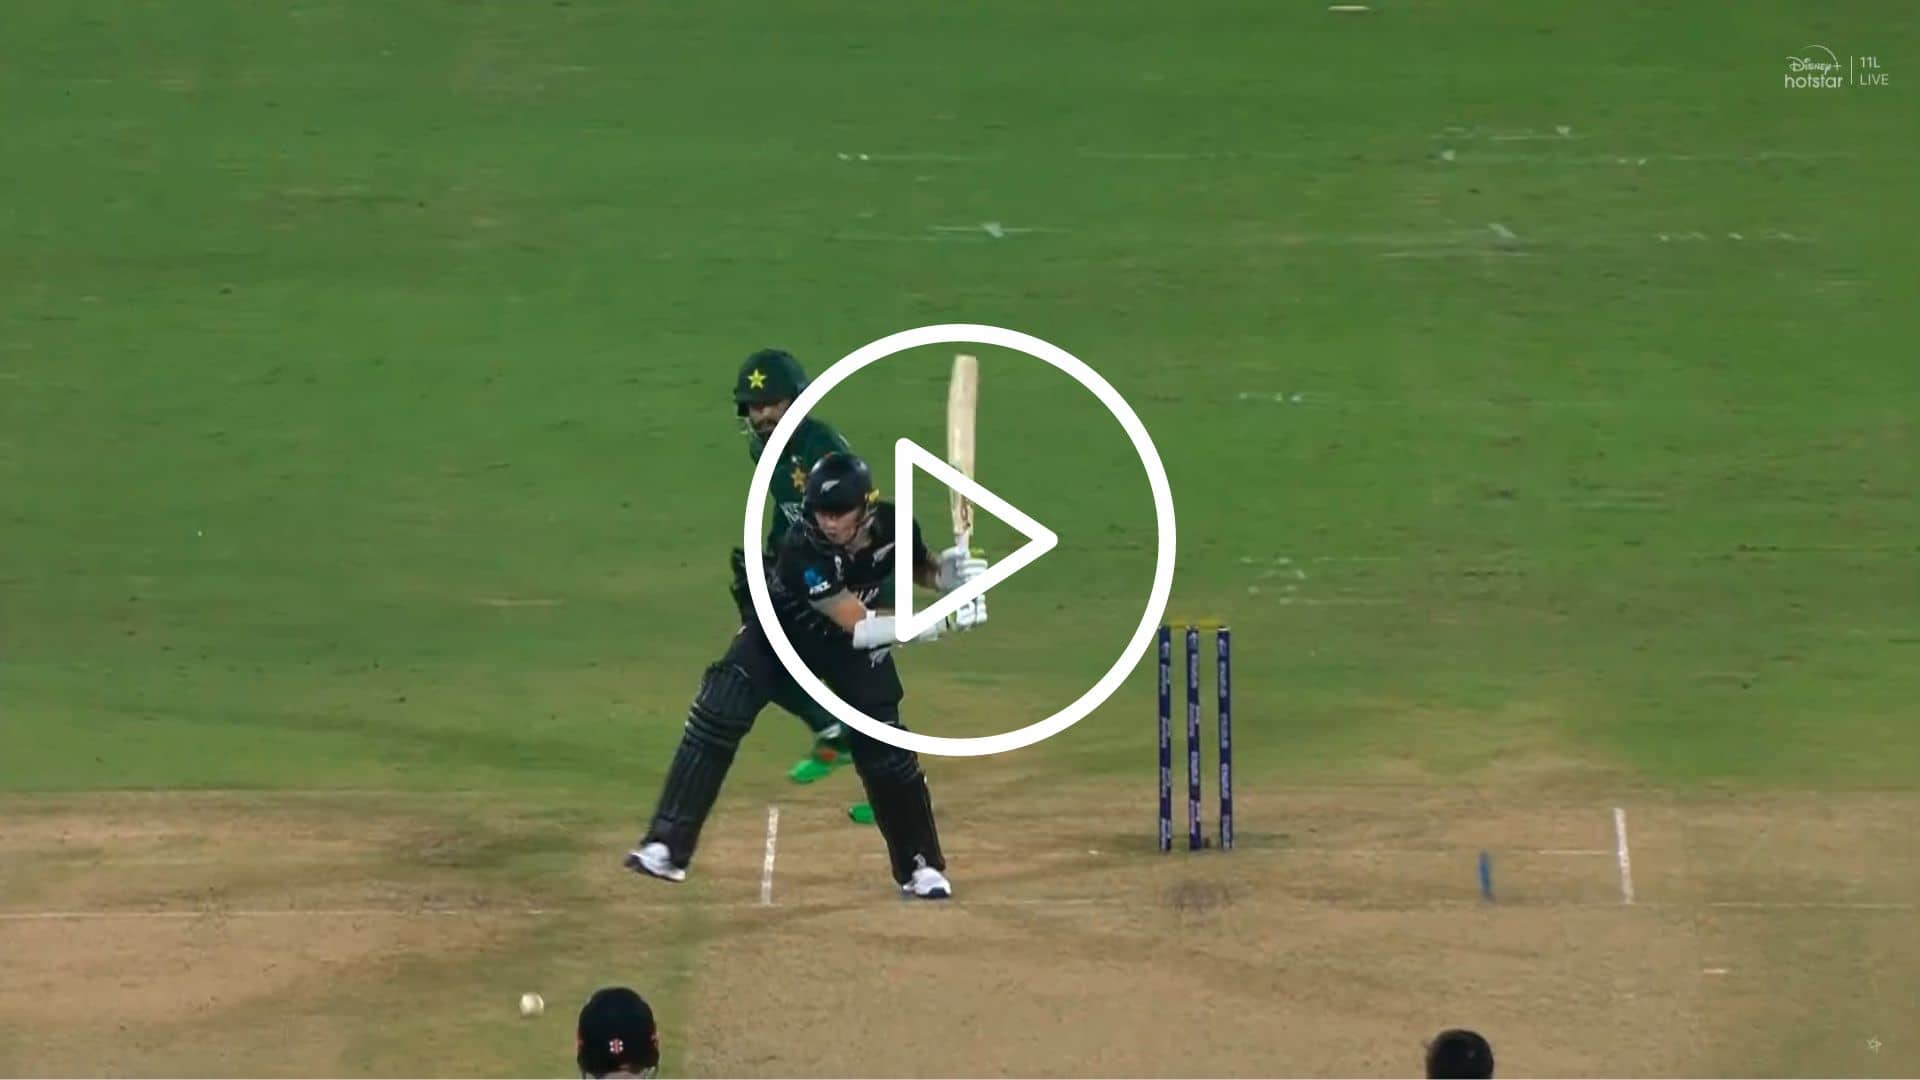 [Watch] Tom Latham Dispatches Salman Agha In An Unusual Fashion For A Boundary